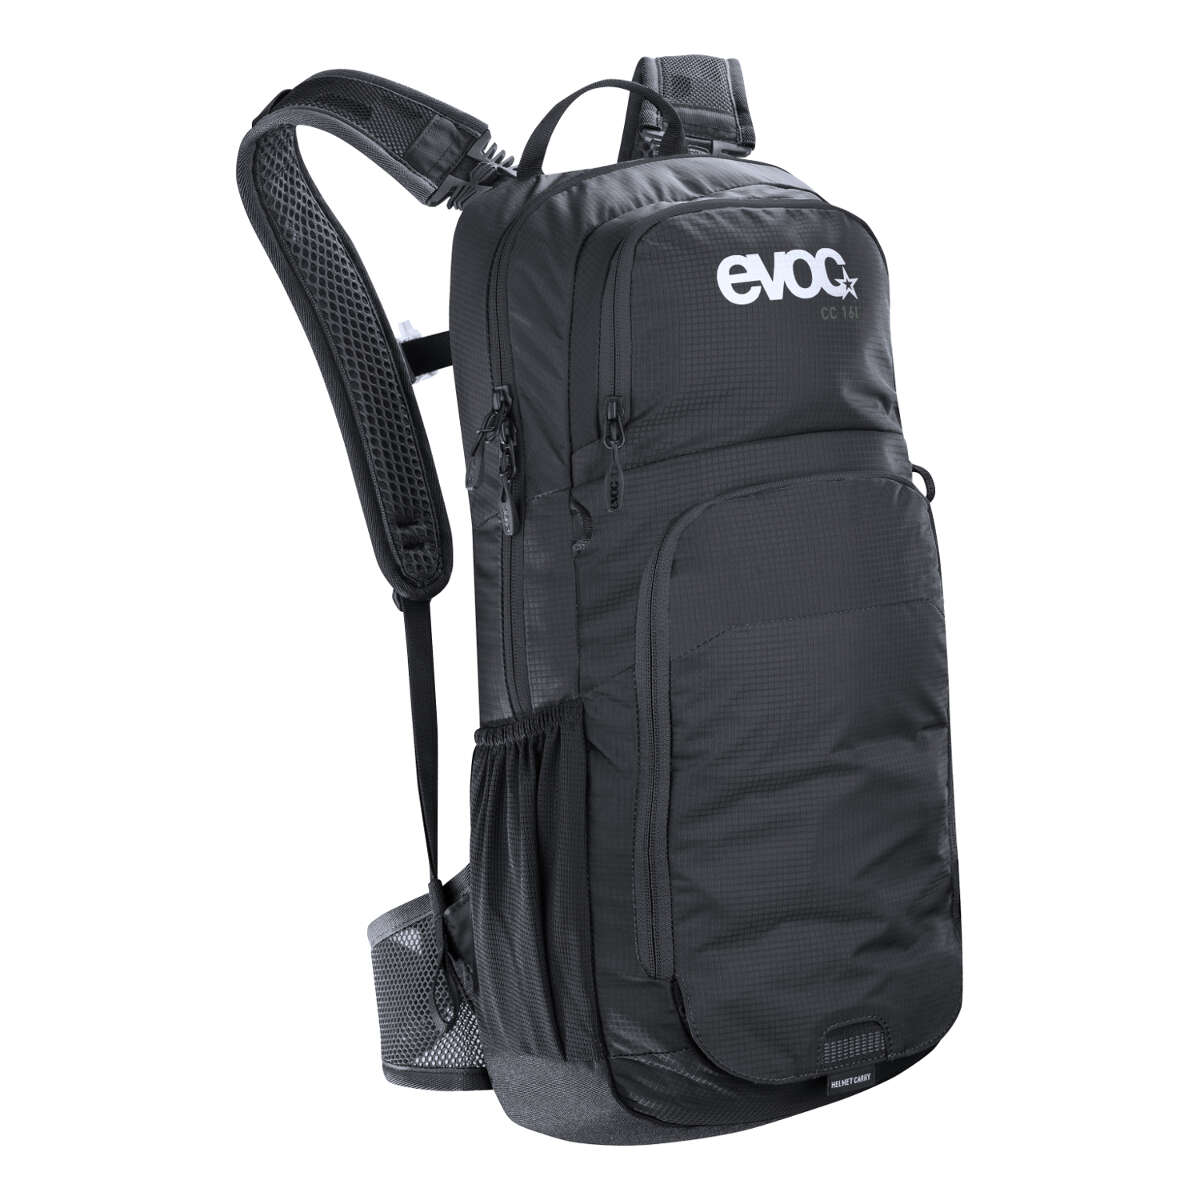 Evoc Backpack with Hydration System Compartment Cross Country Black, 16 Liters